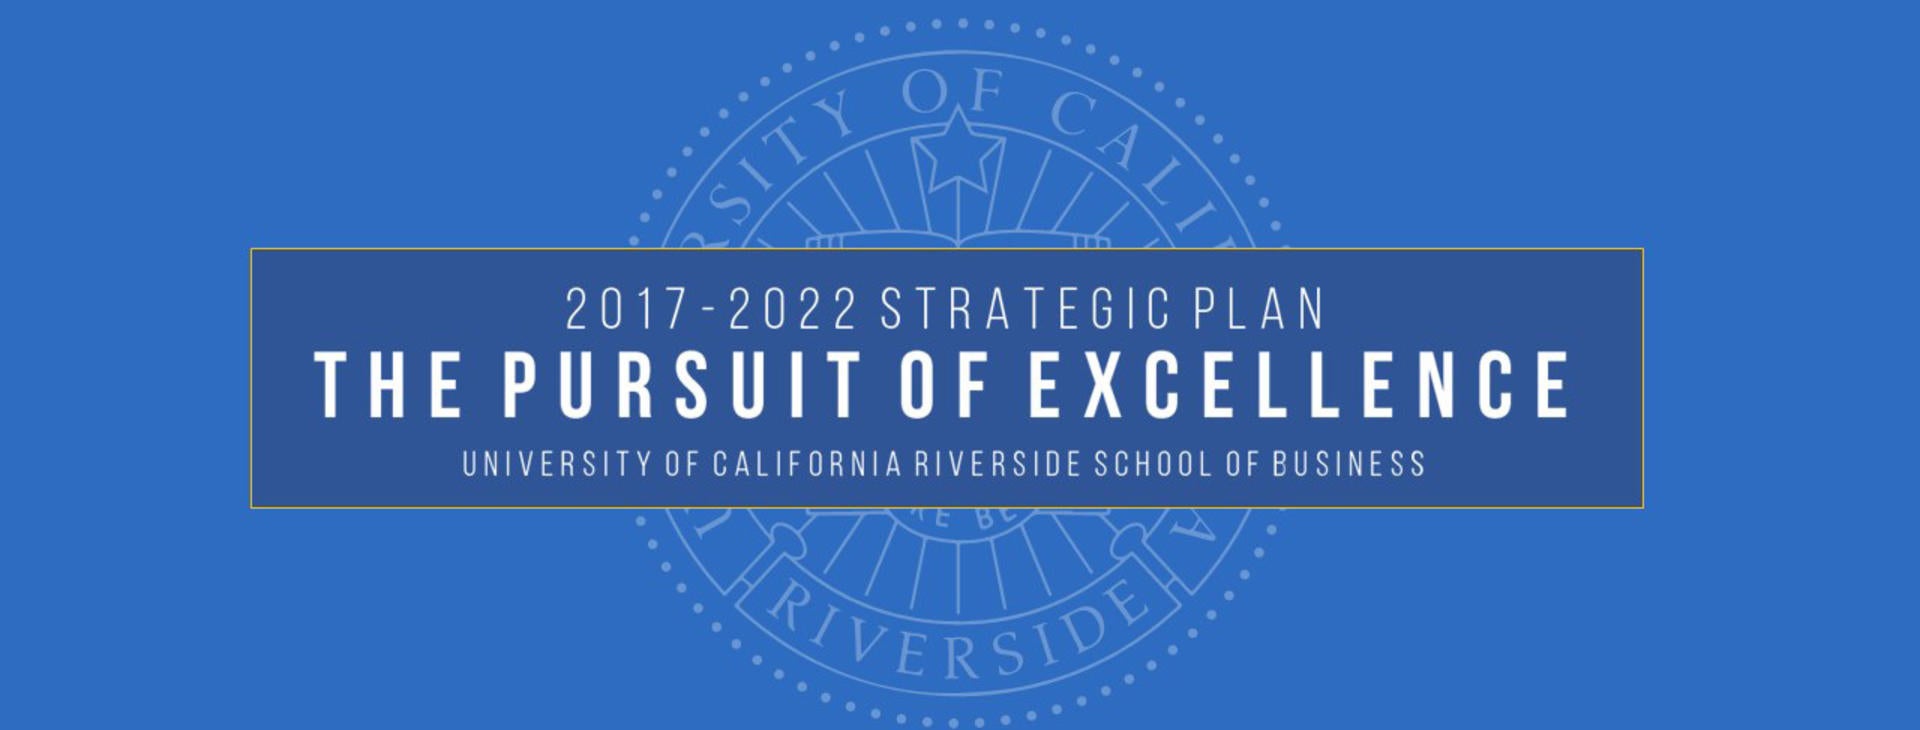 UCR School of Business - Our Strategy